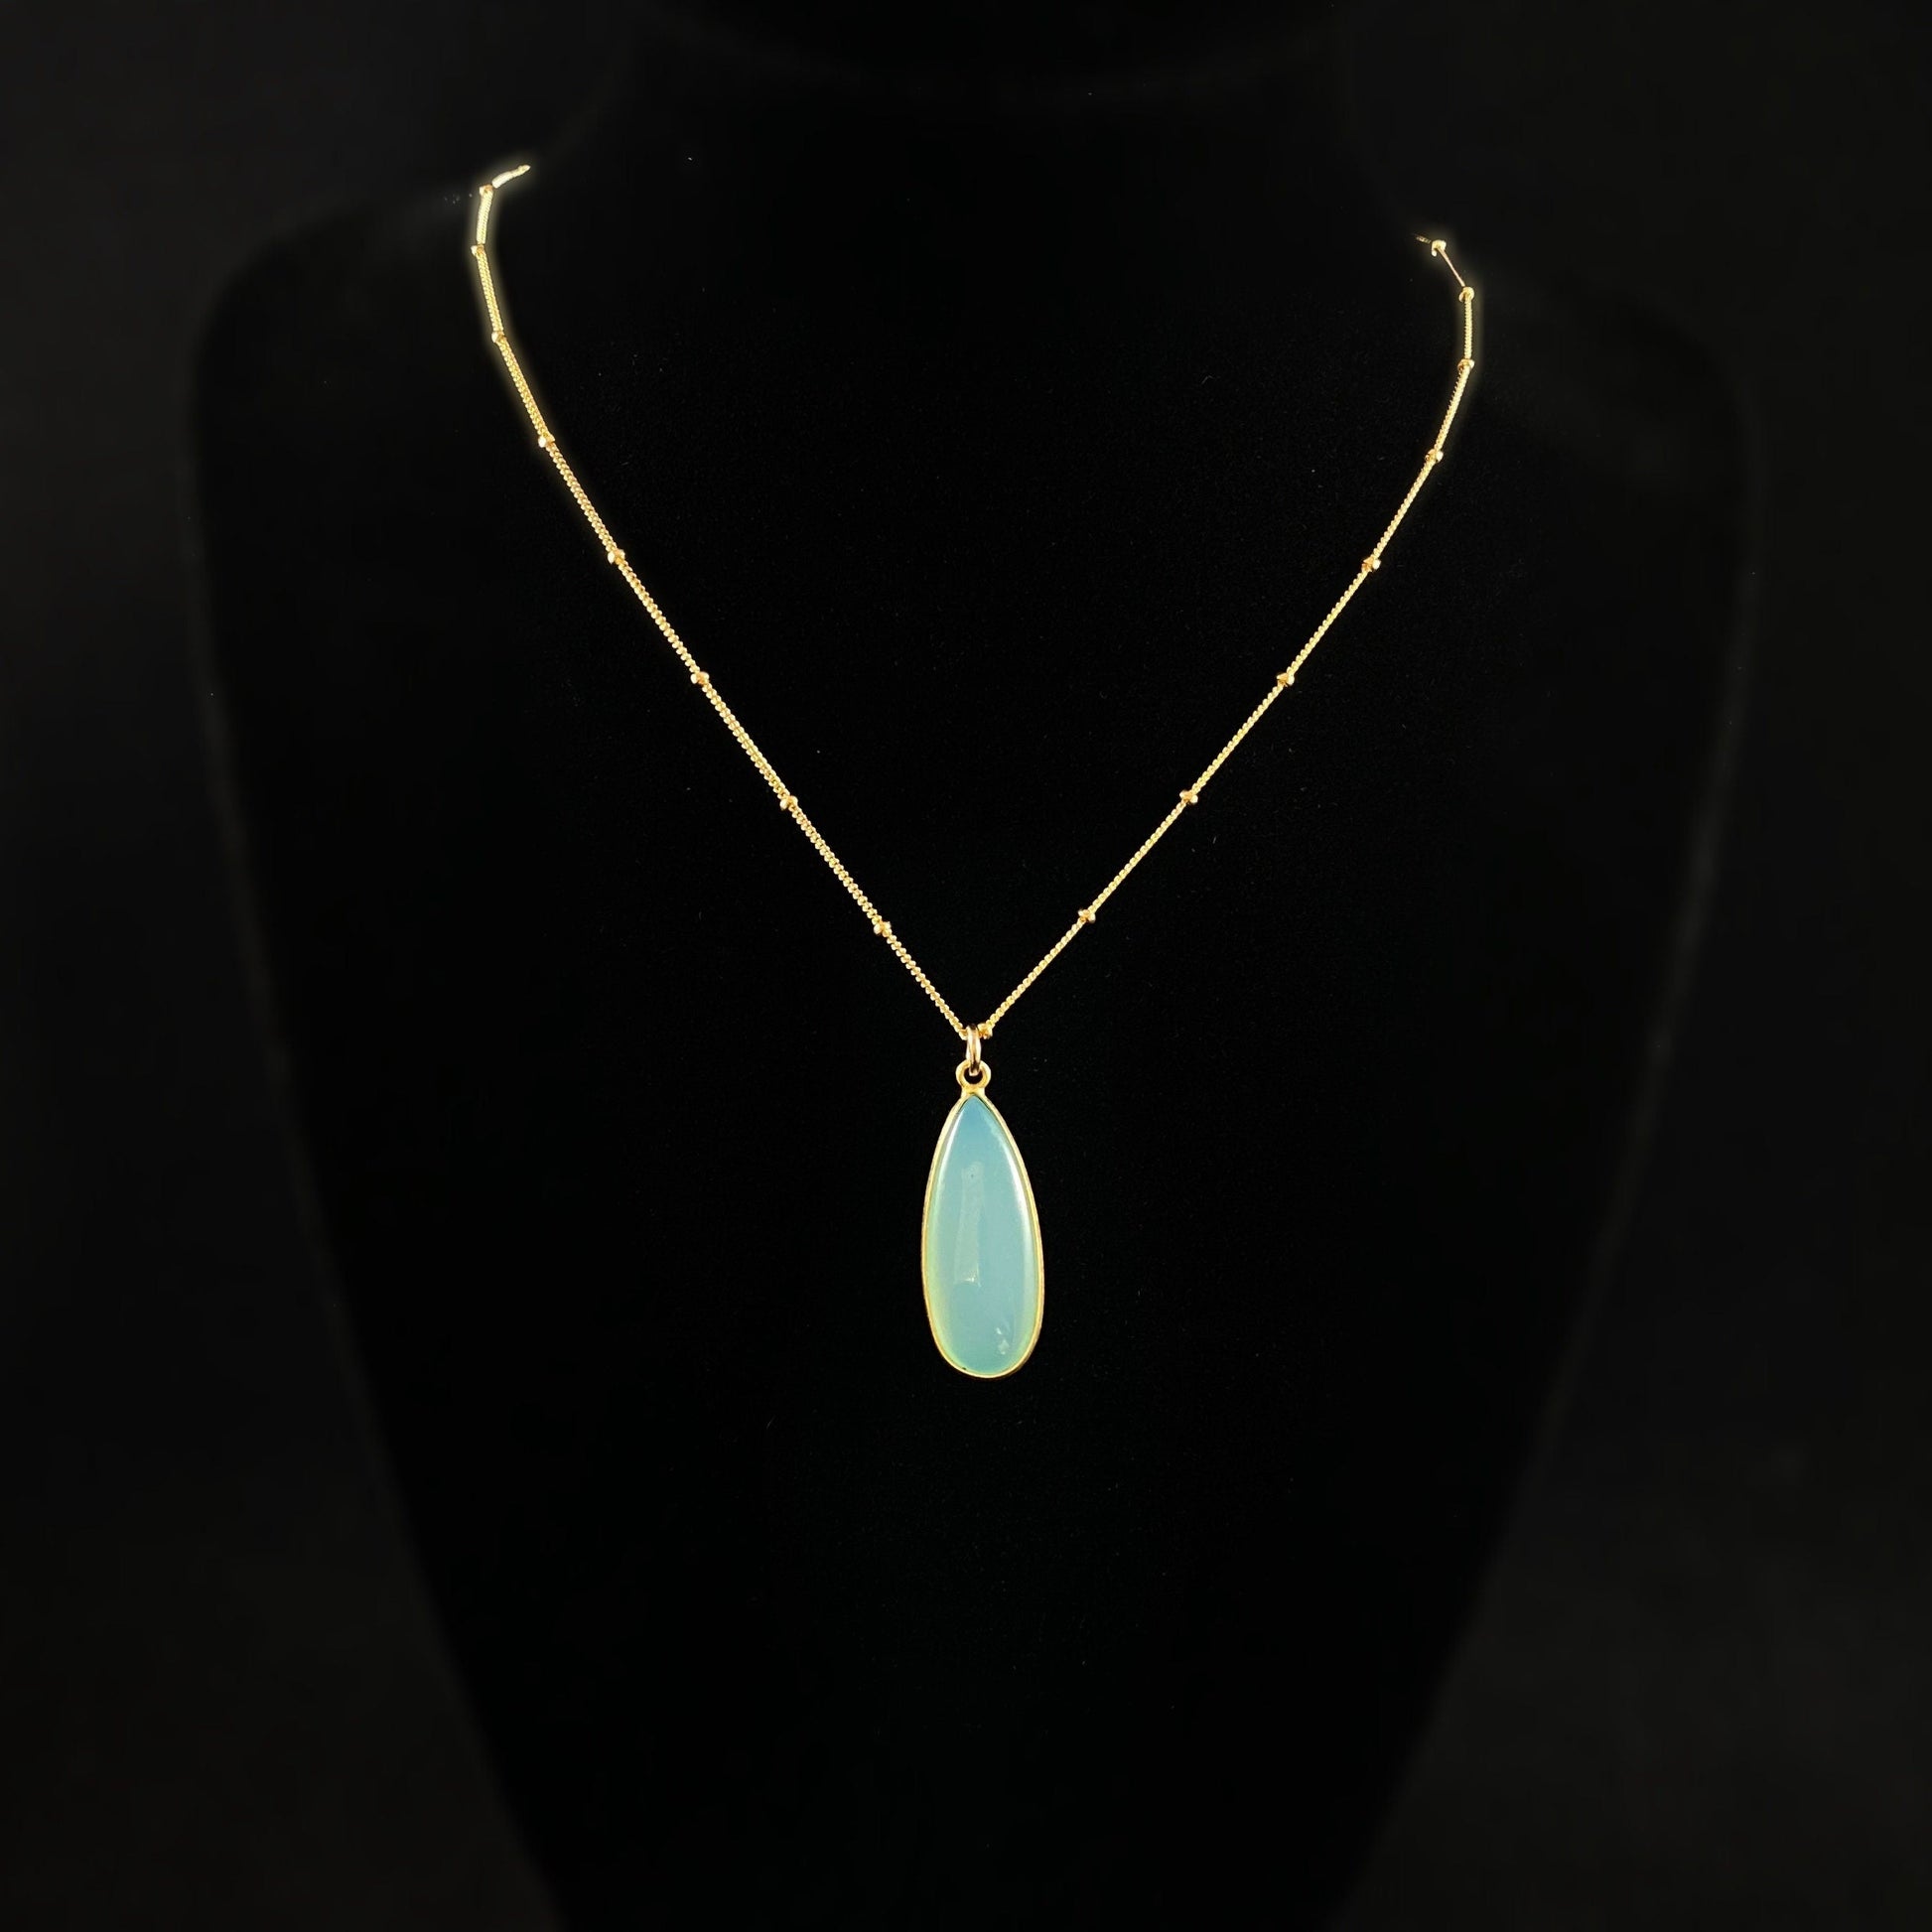 Light Blue Chalcedony Necklace - Natural Crystal Jewelry Made in USA